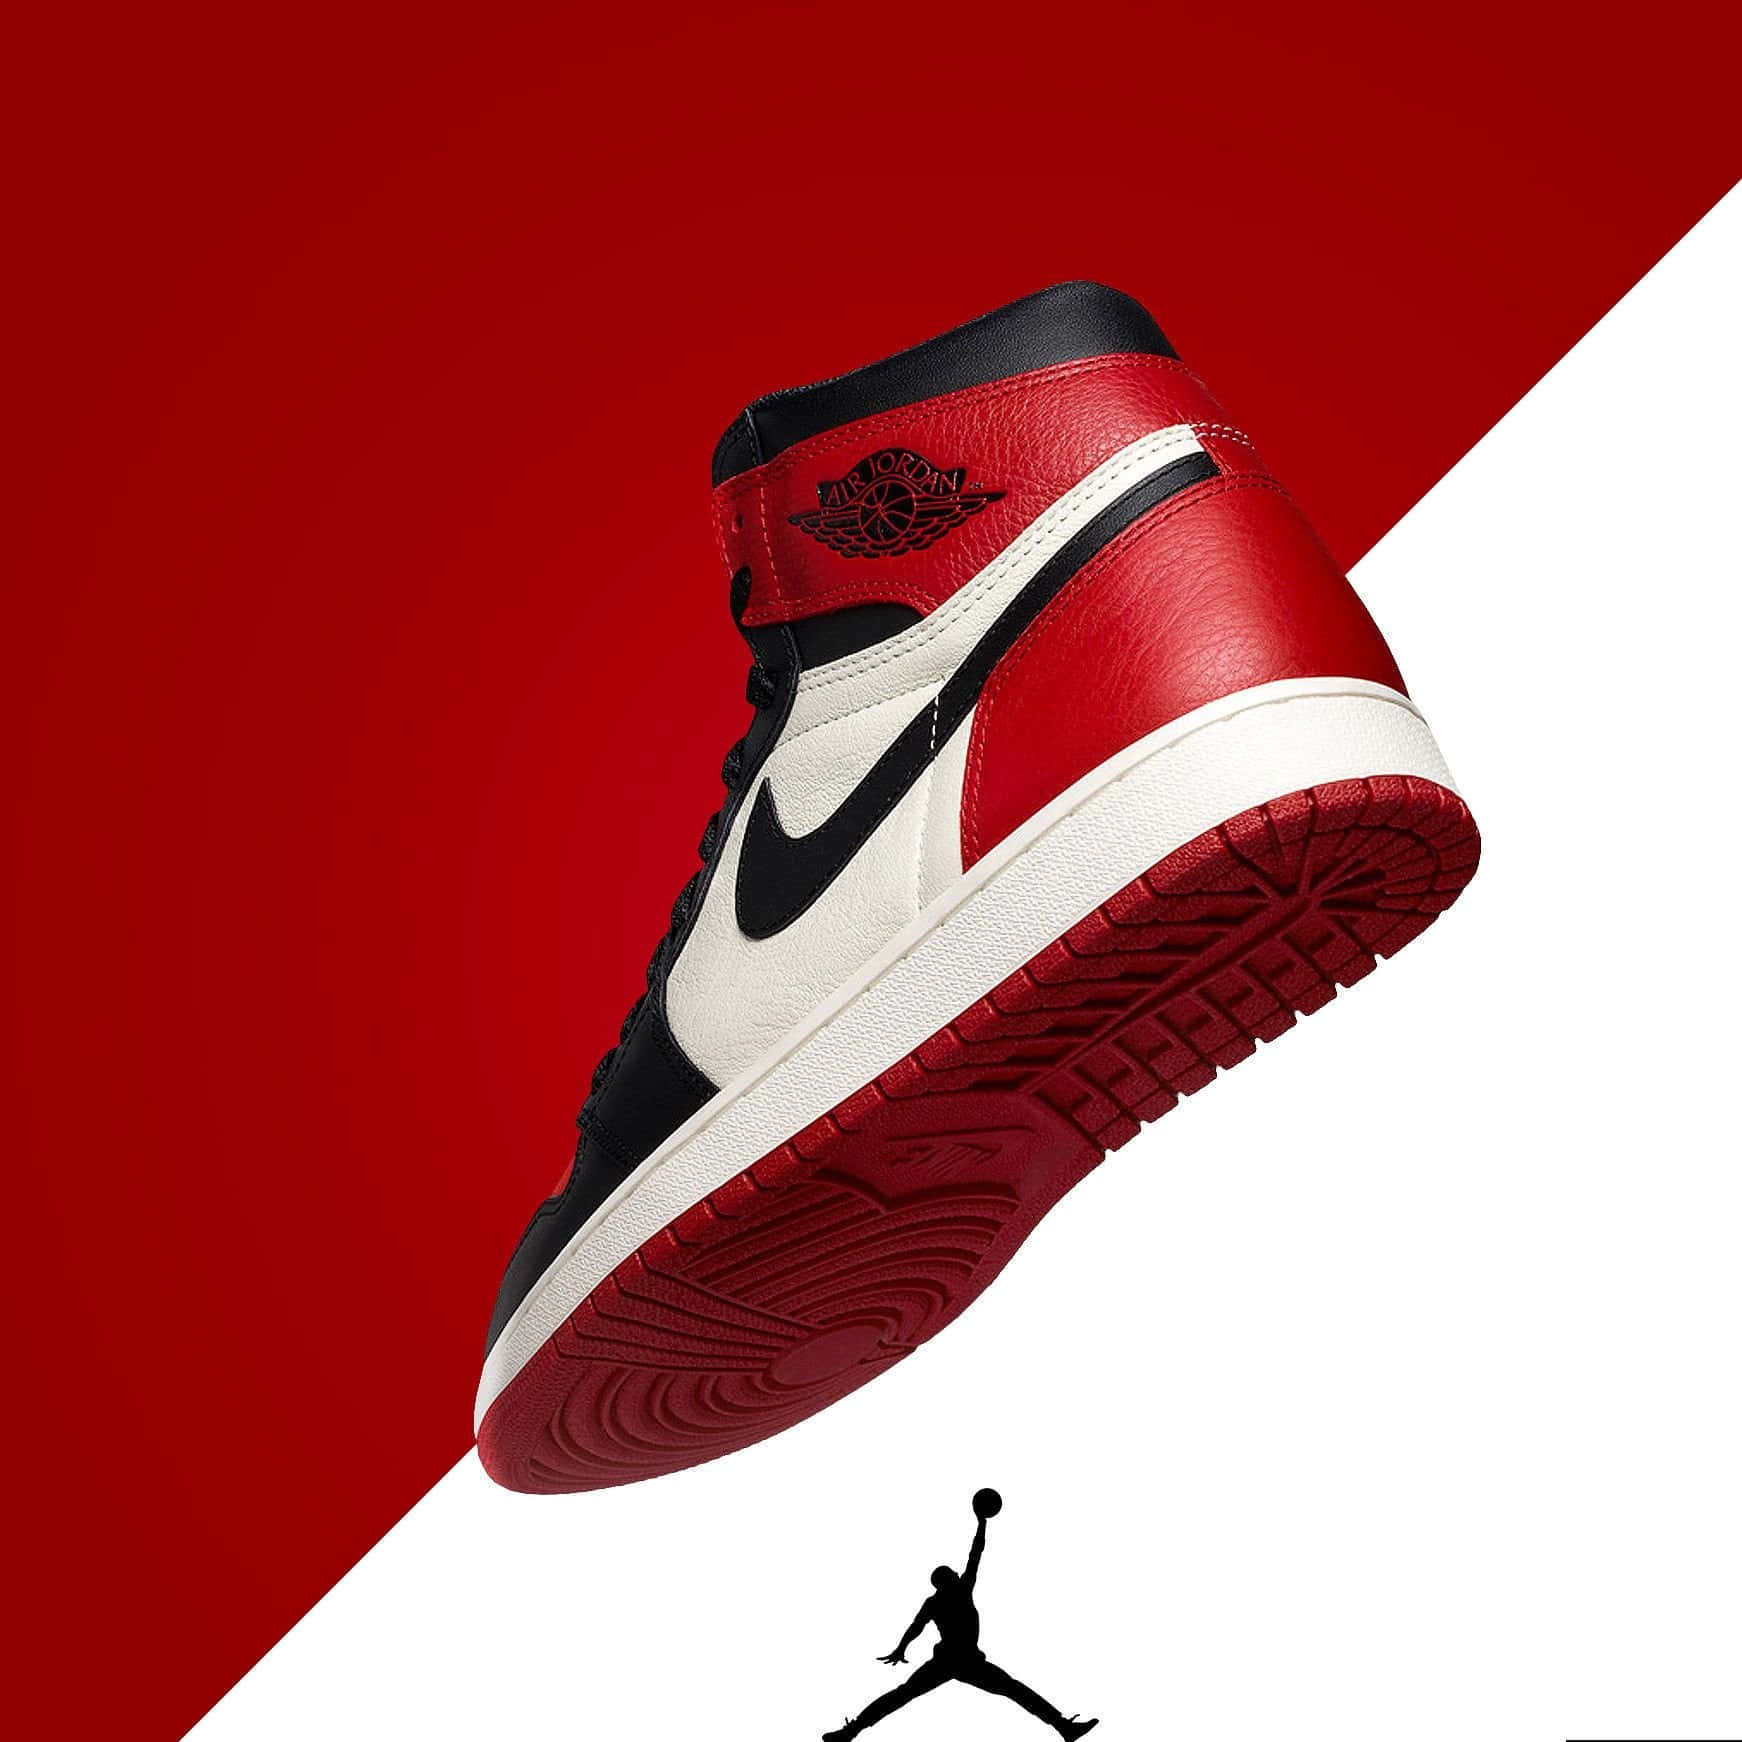 Red Jordan Sneakers For the Love of Style Wallpaper